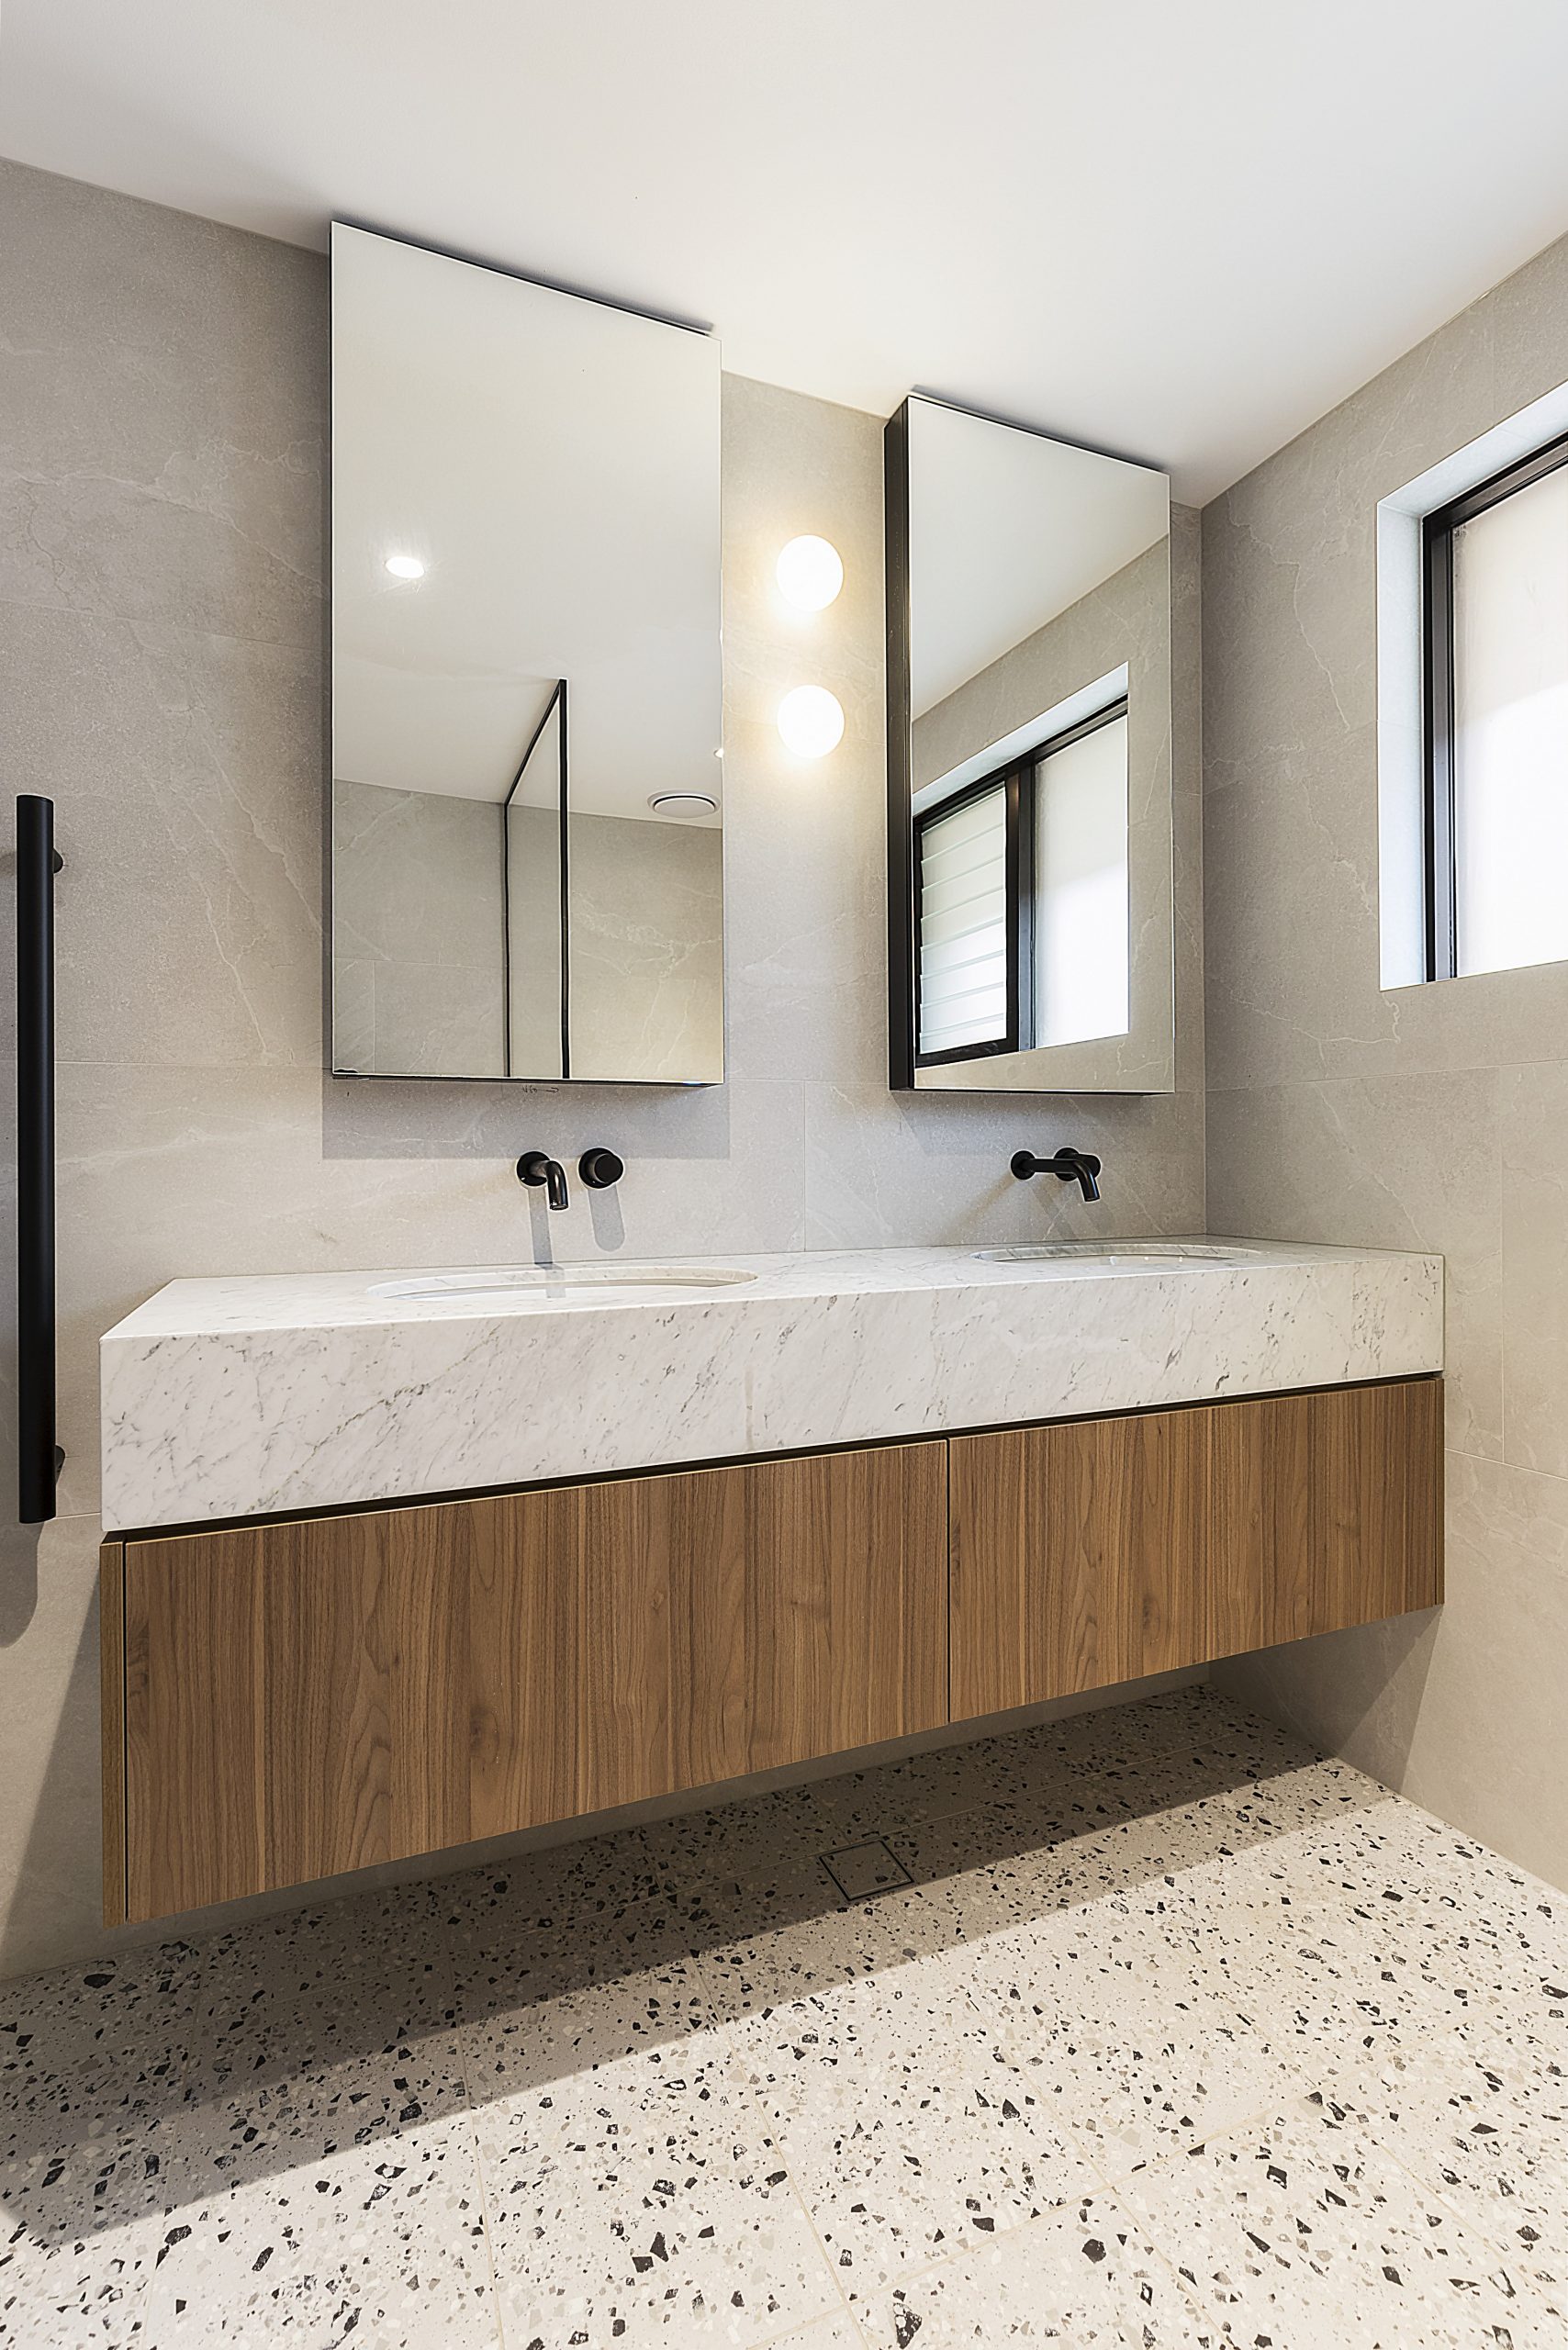 Polytec Woodmatt double vanity with a Carrara Marble top and mirror cabinets - Concord, Sydney